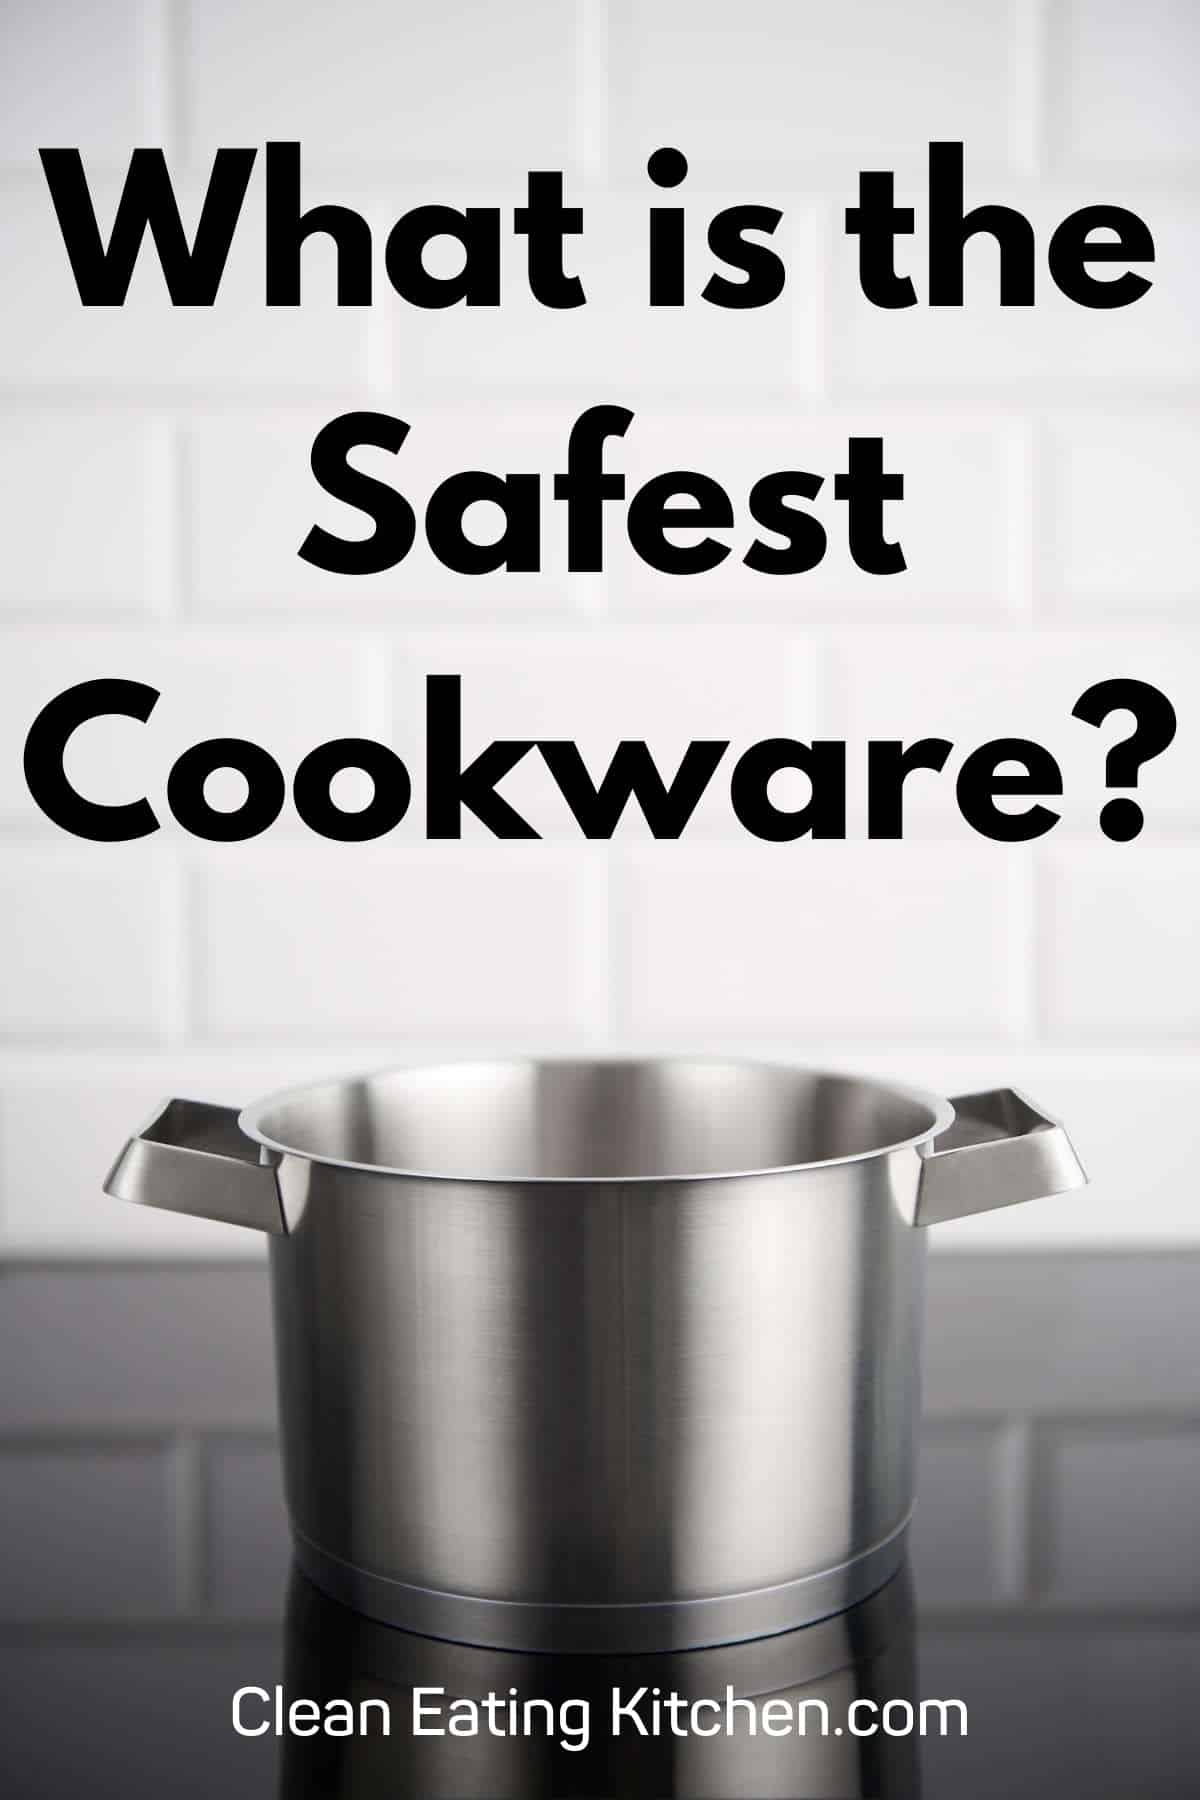 https://www.cleaneatingkitchen.com/wp-content/uploads/2021/01/safest-cookware-image.jpg